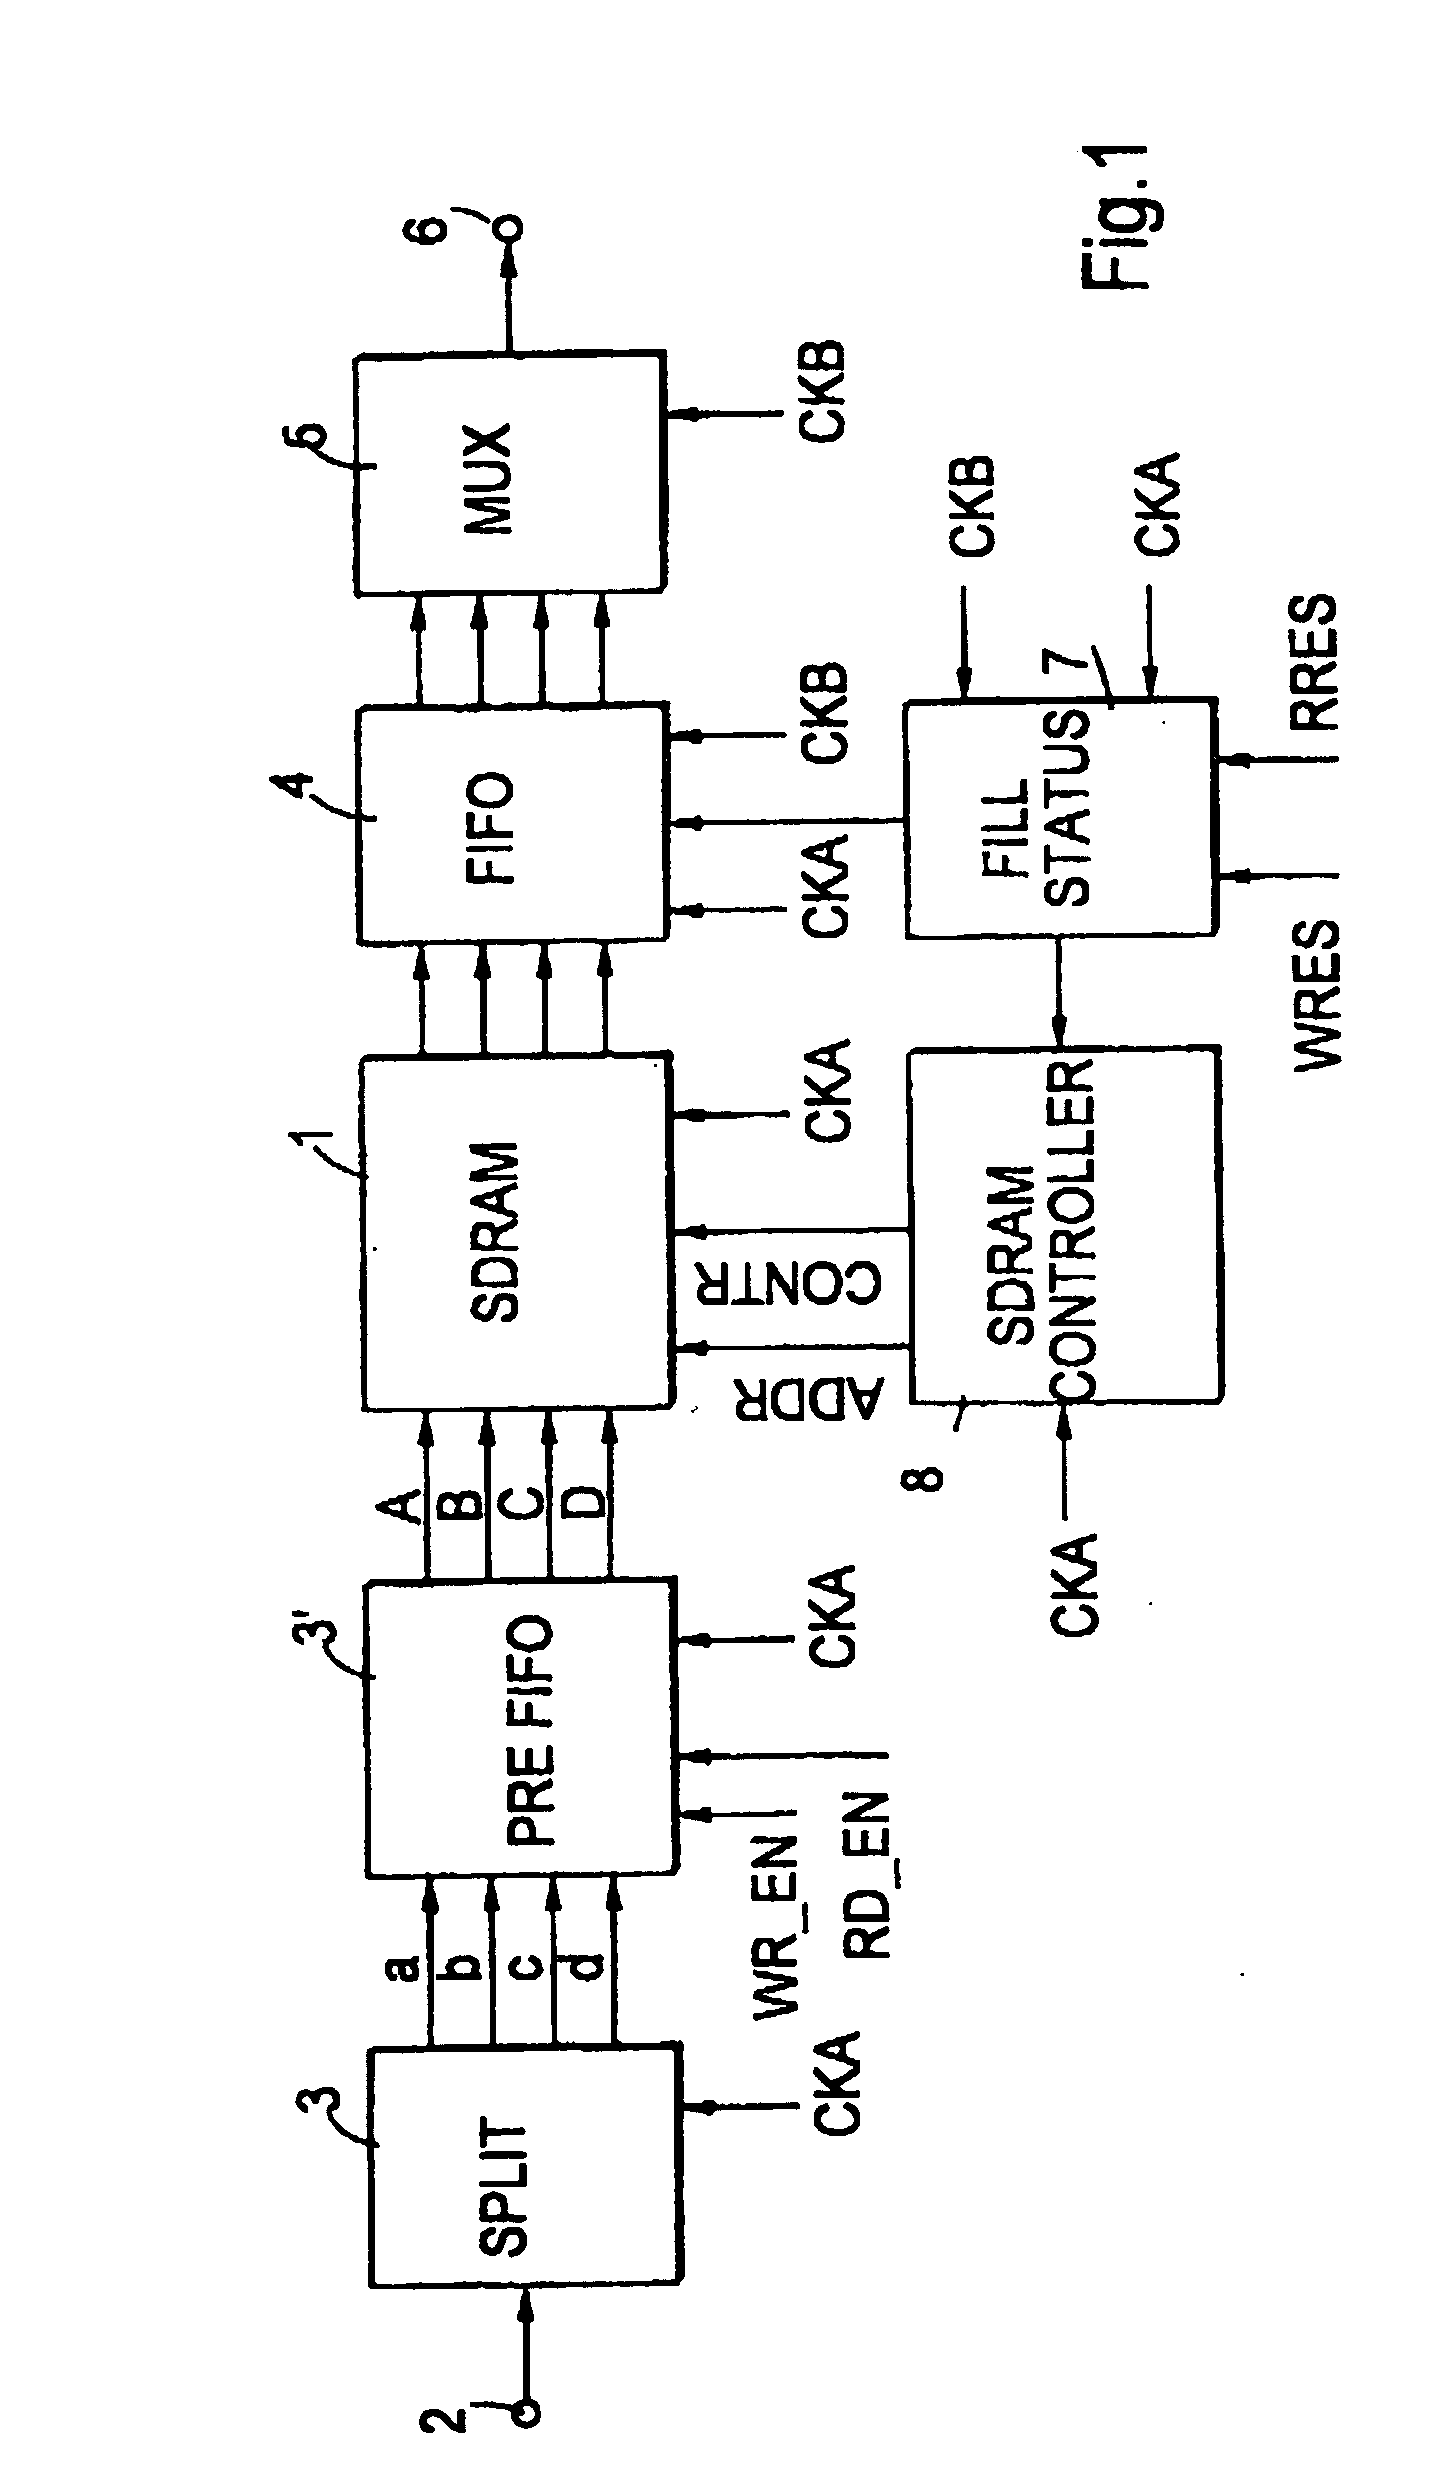 Method for storing video signals